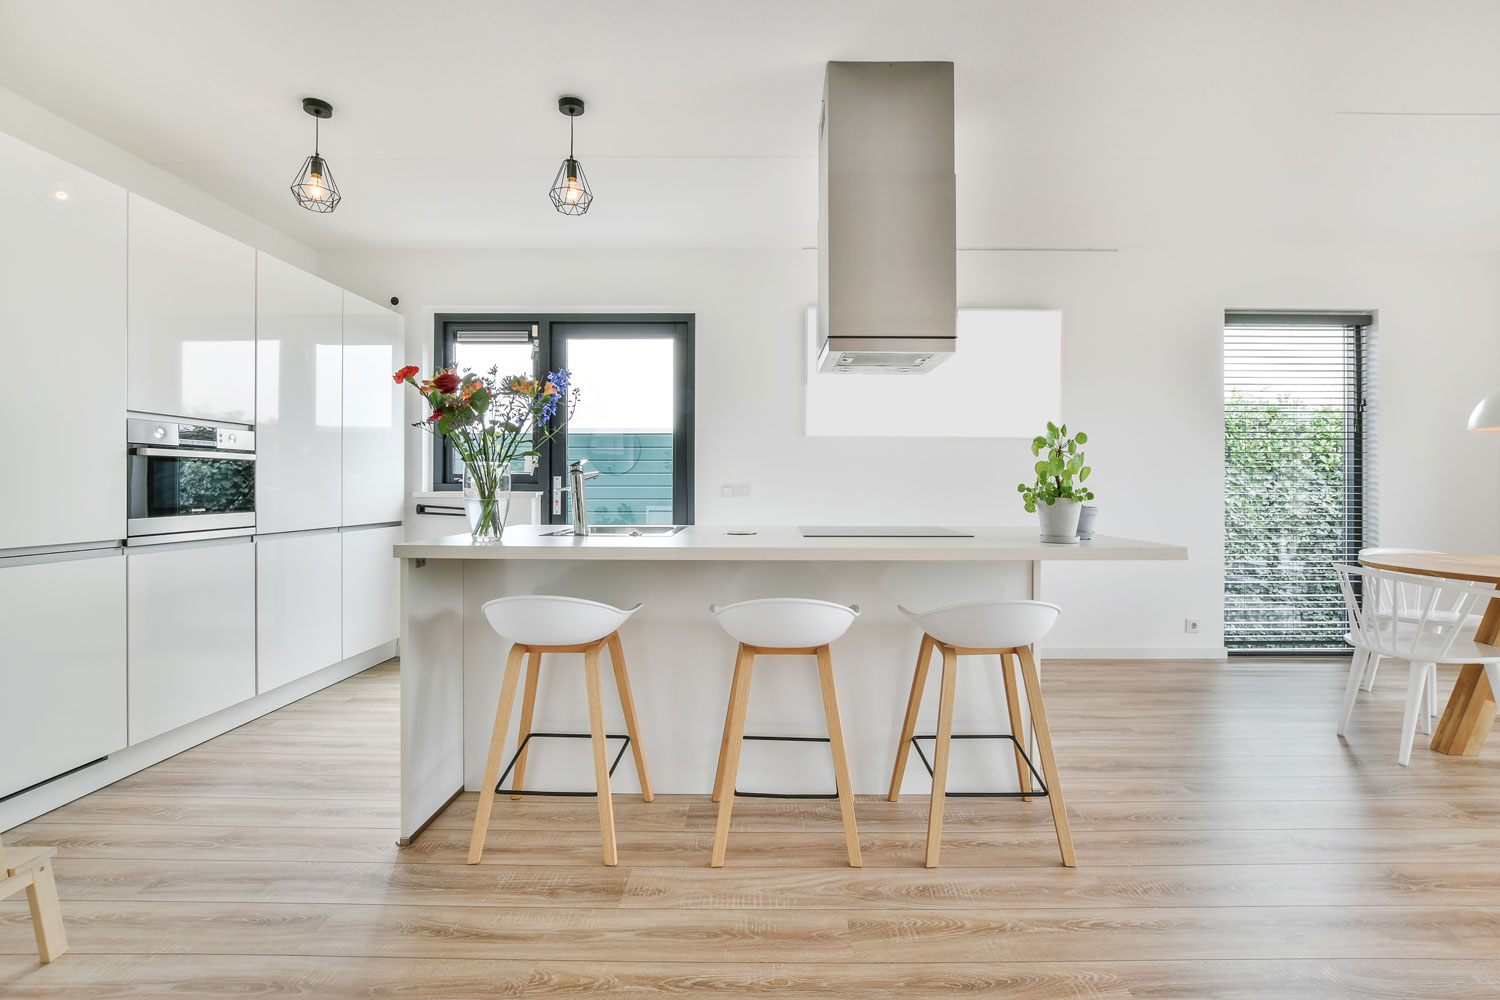 Light brown laminated kitchen flooring with white painted walls and matching white cabinets